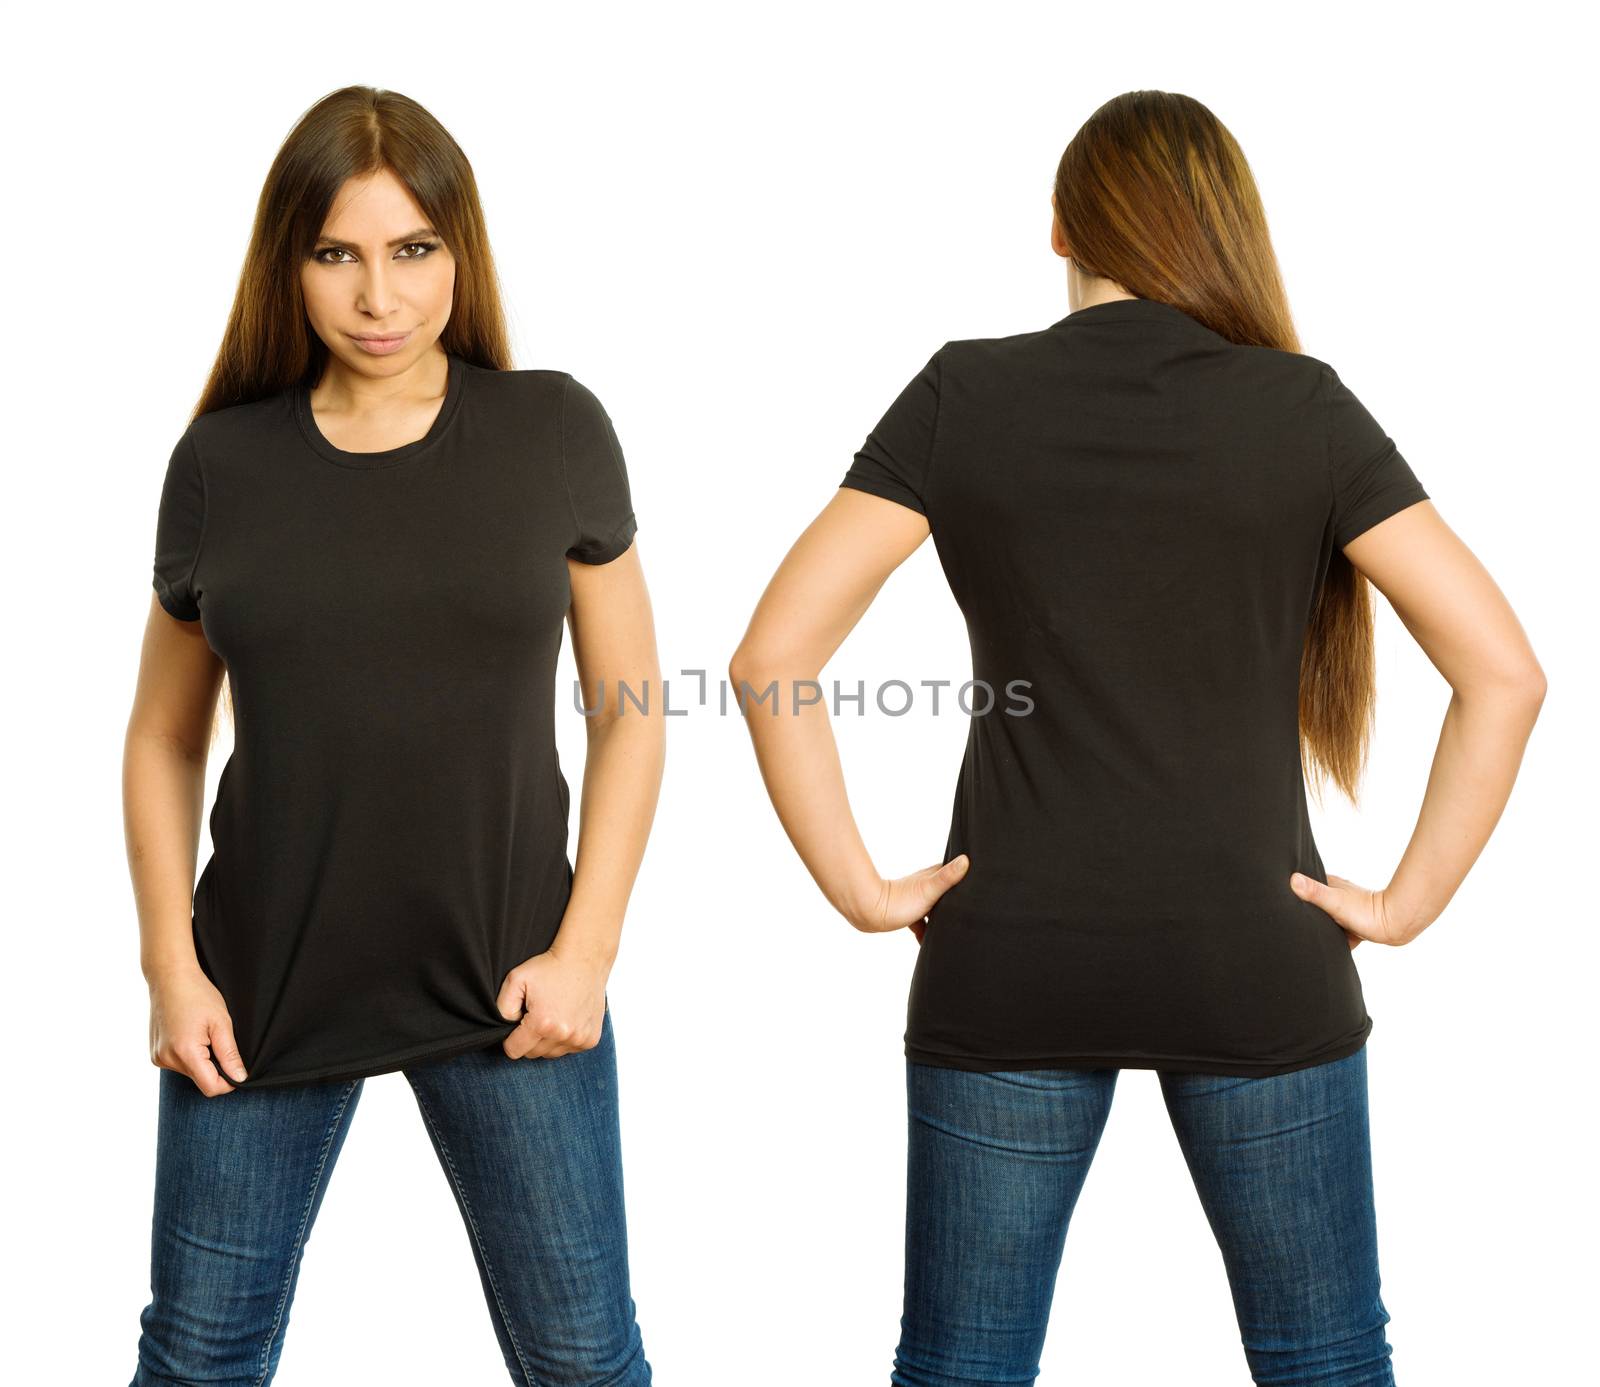 Sexy woman with blank black shirt and serious stare by sumners